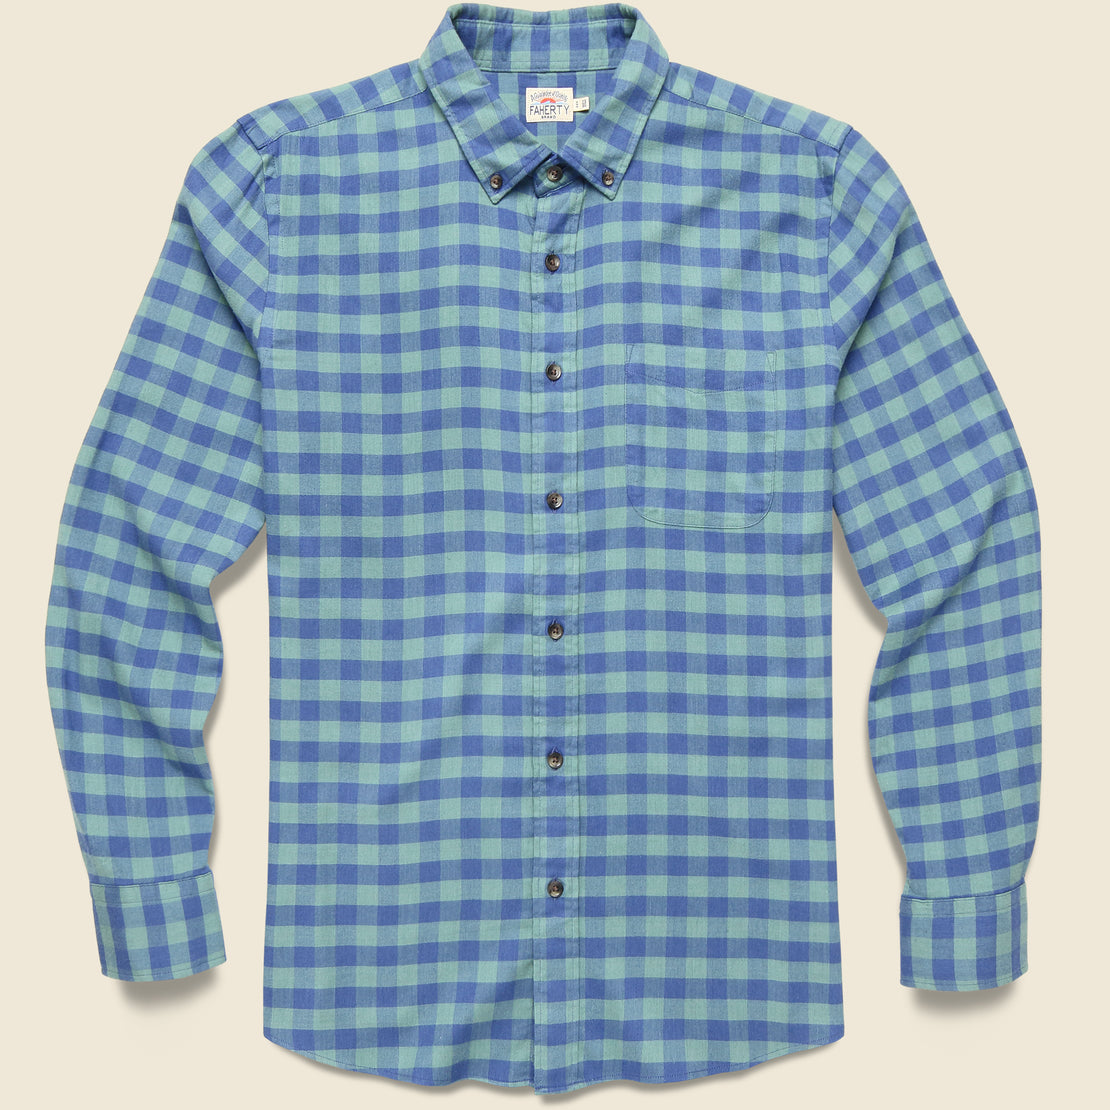 Faherty All Time Shirt - Moss Cove Gingham